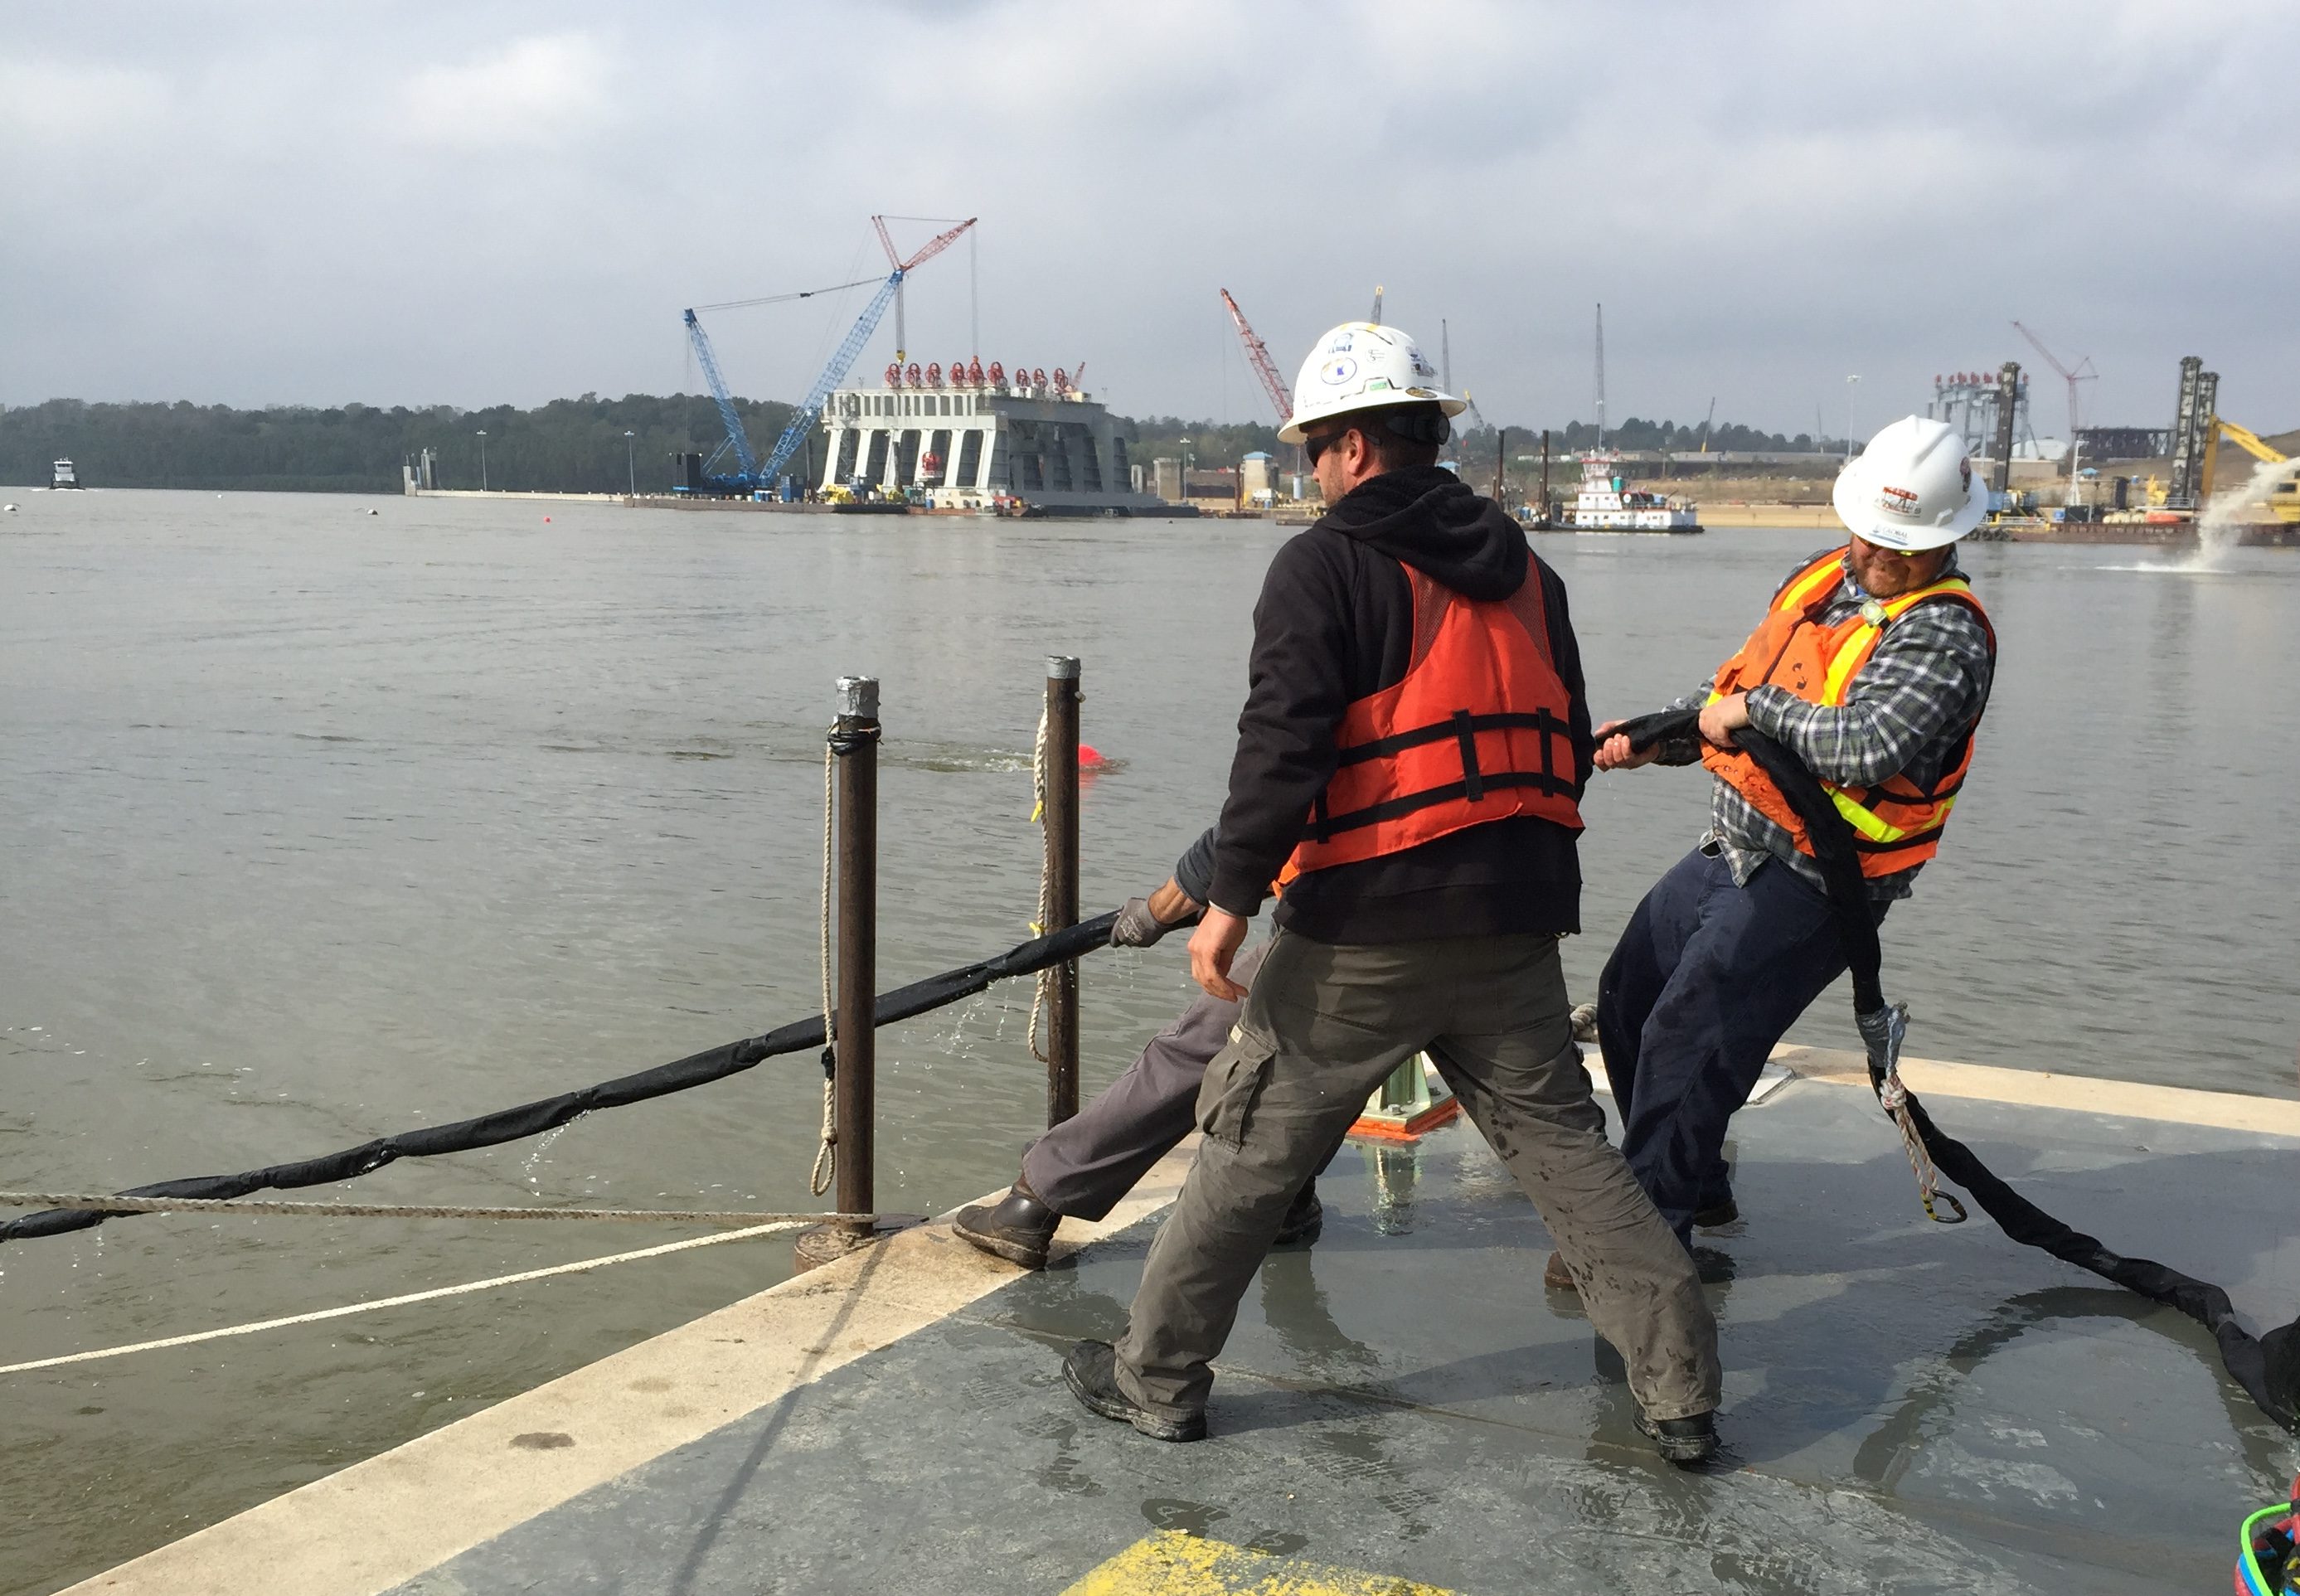 A support crew pulls a diver to the surface by the "umbilical" line at the Olmsted construction site.